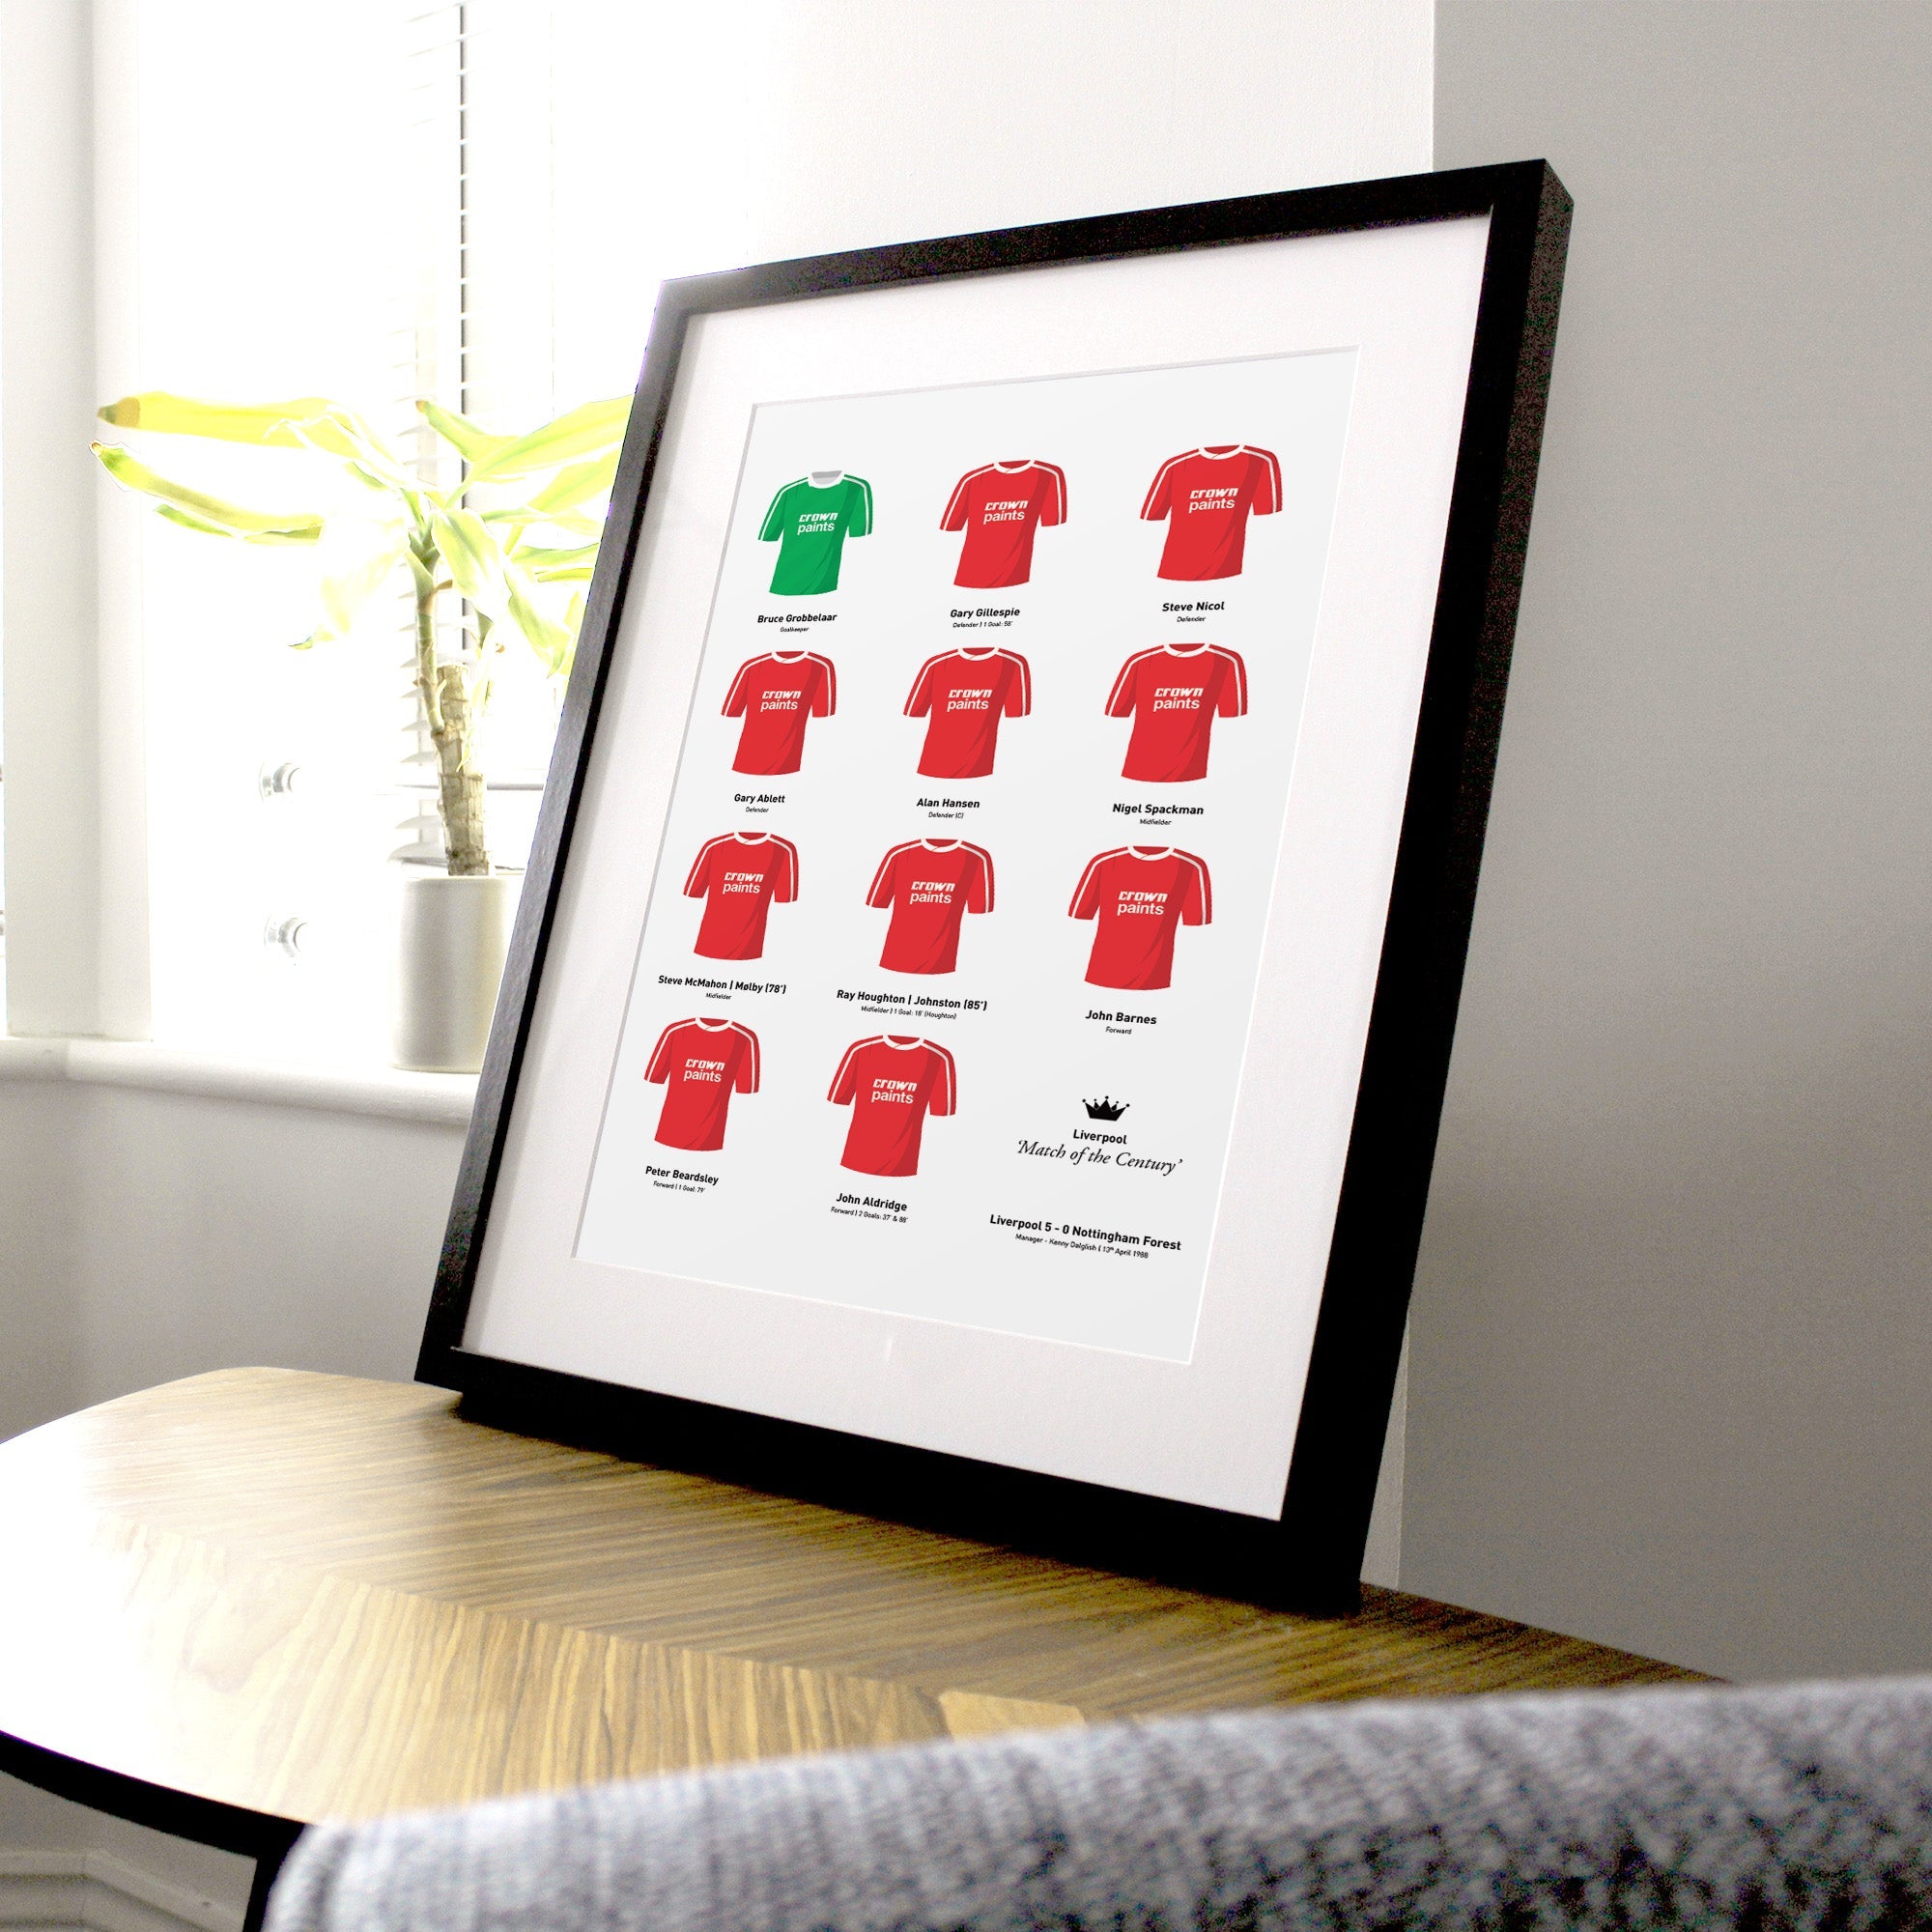 Liverpool 1988 'Game of the Century' Football Team Print Good Team On Paper